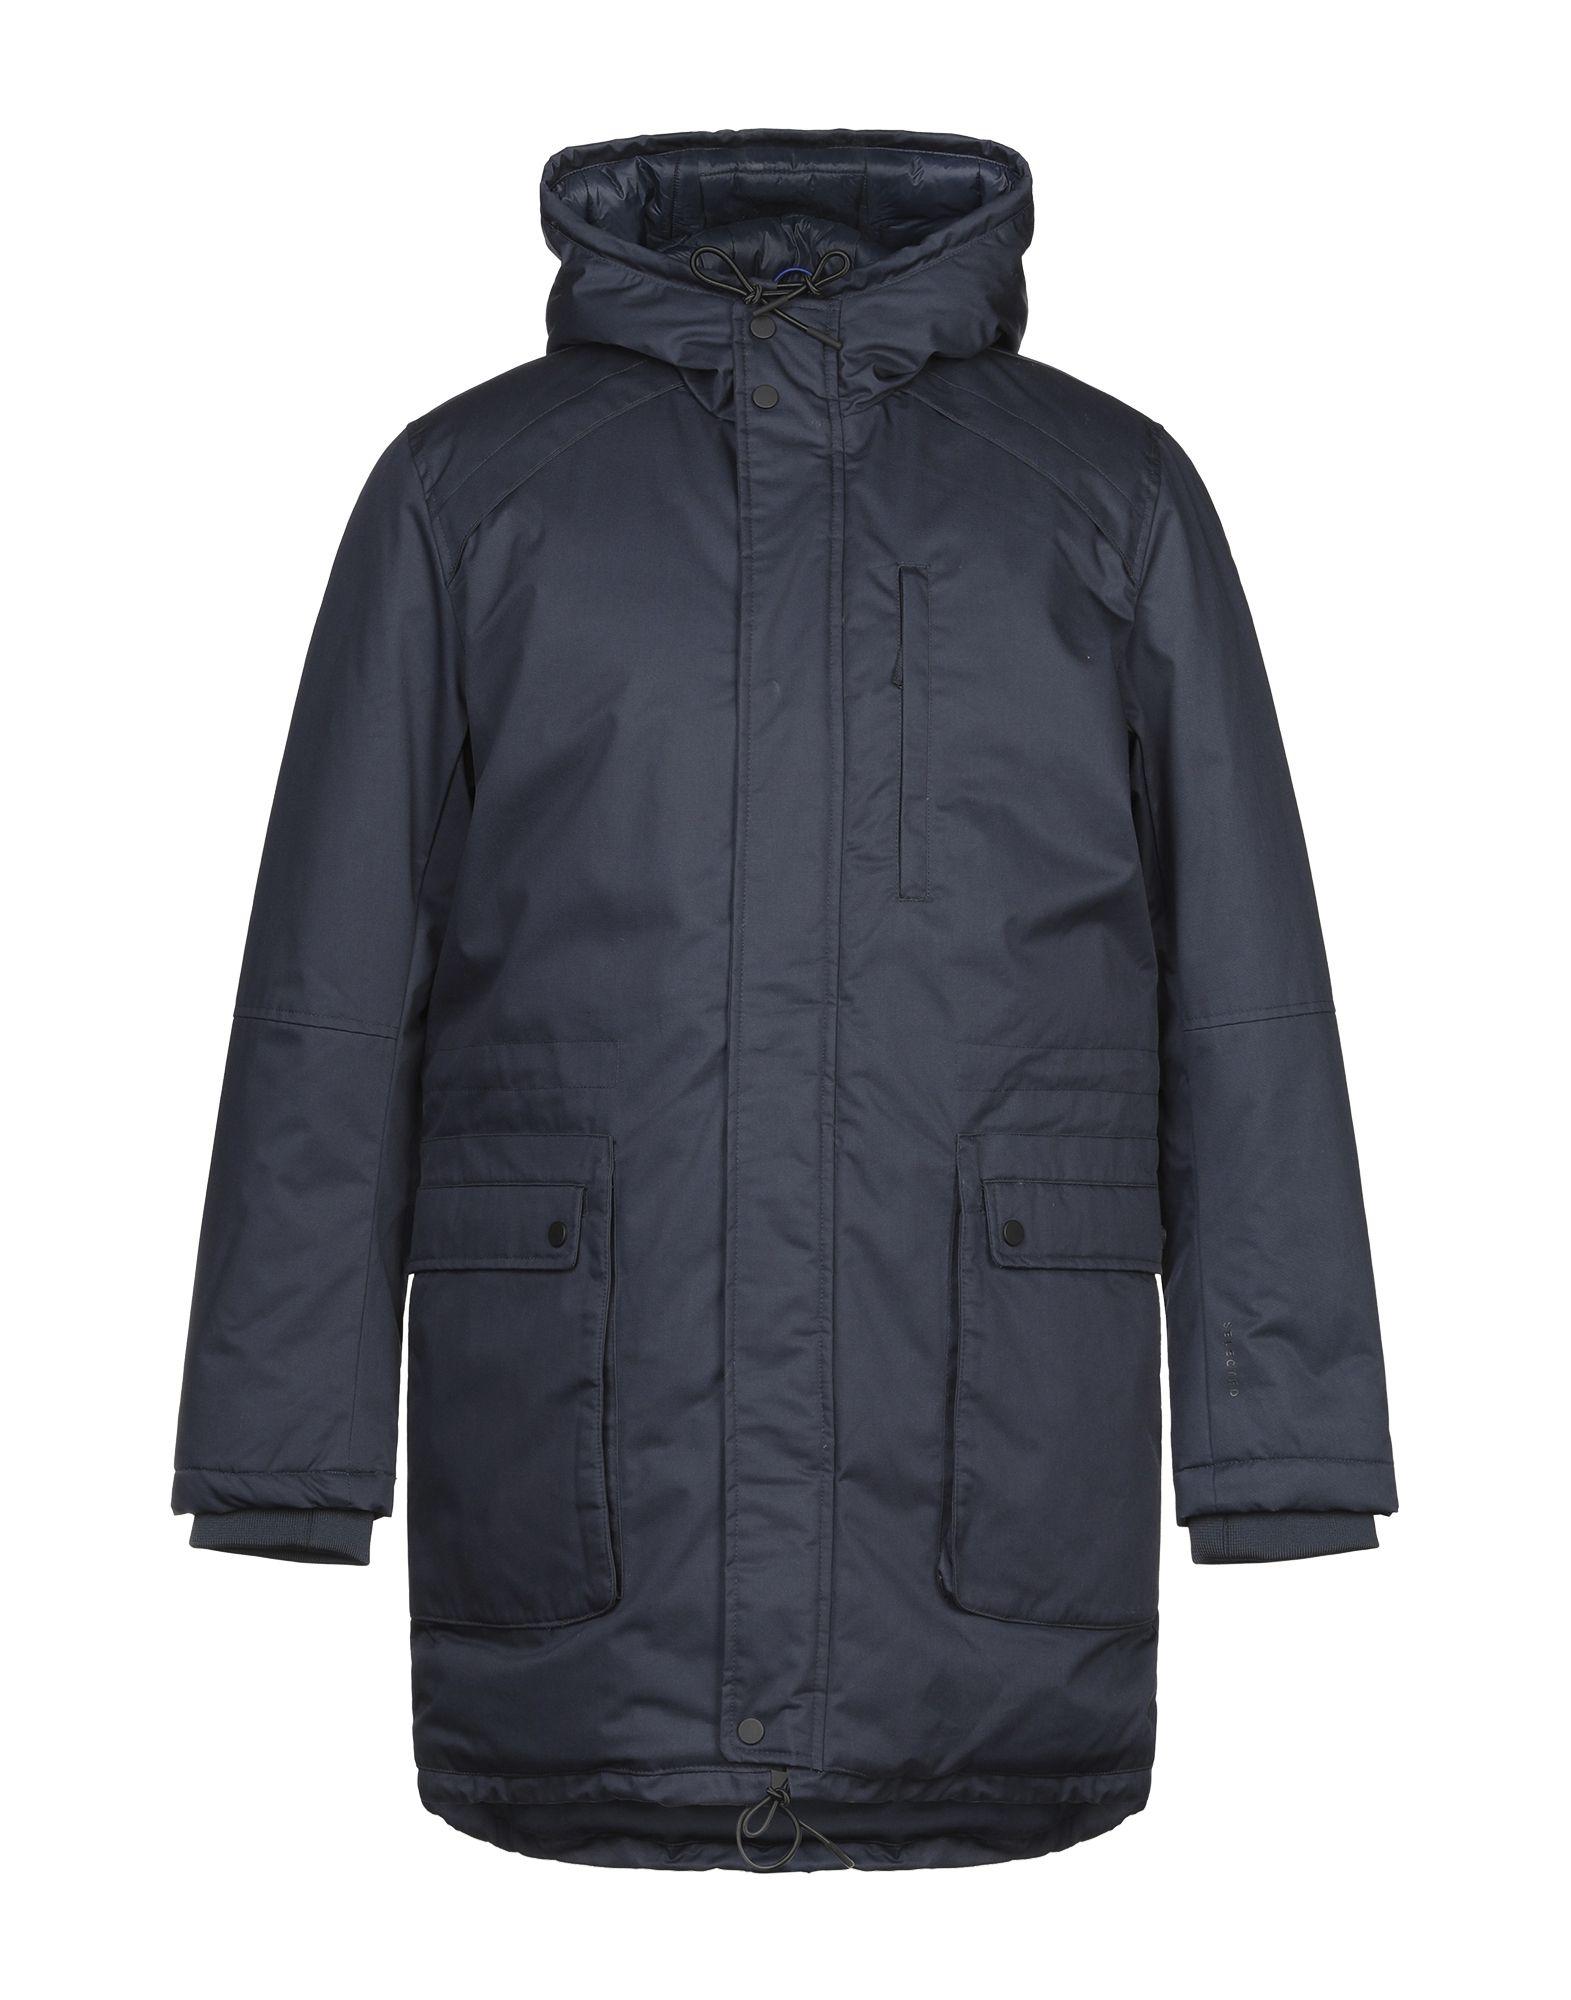 SELECTED Cashmere Synthetic Down Jacket in Dark Blue (Blue) for Men - Lyst